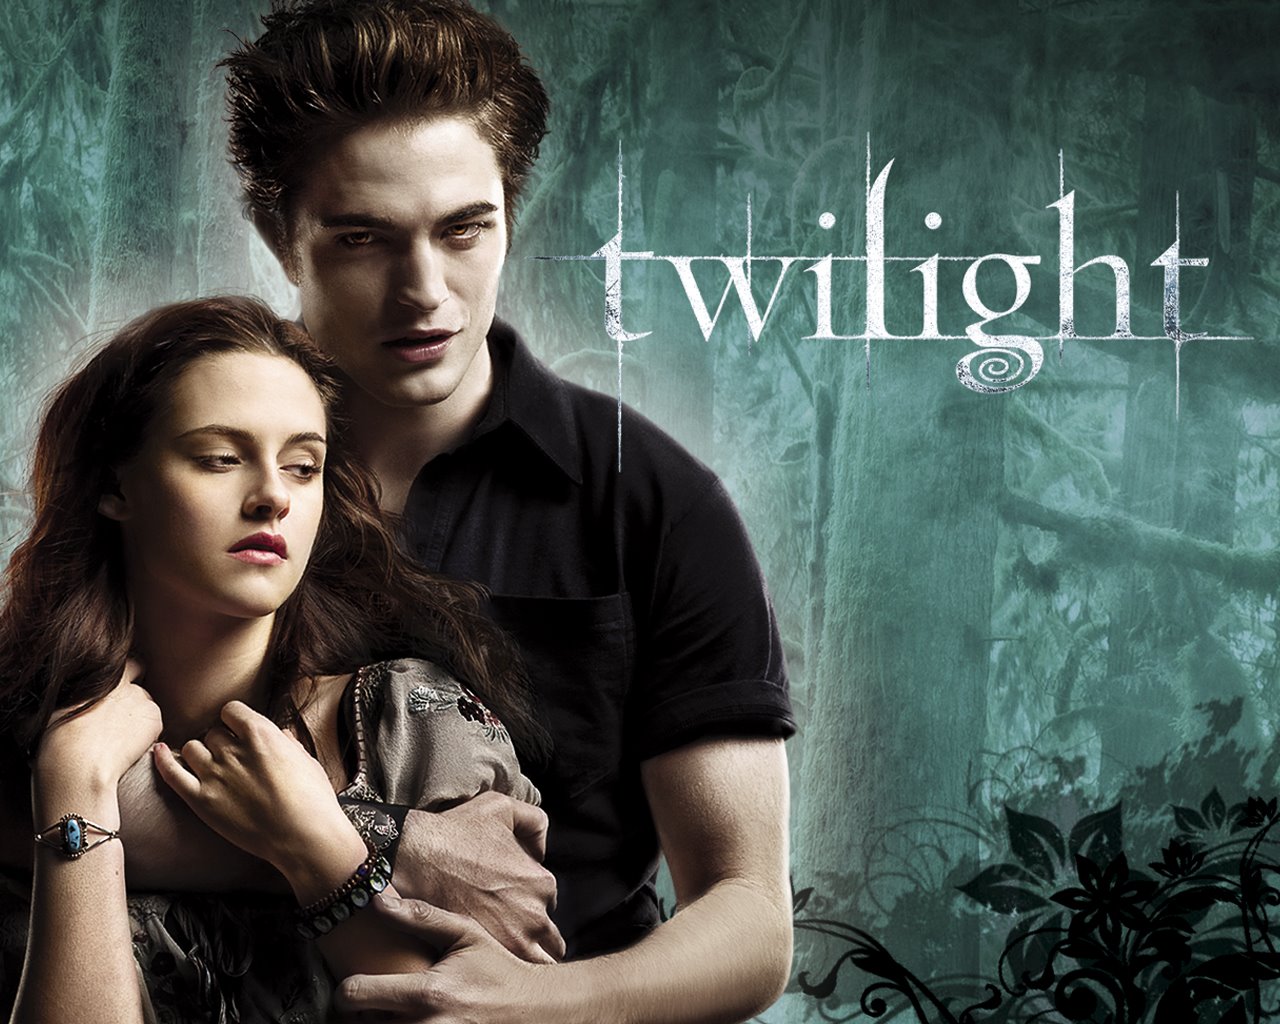 Previous, Movies - Films T - Main characters of the Twilight movie wallpaper